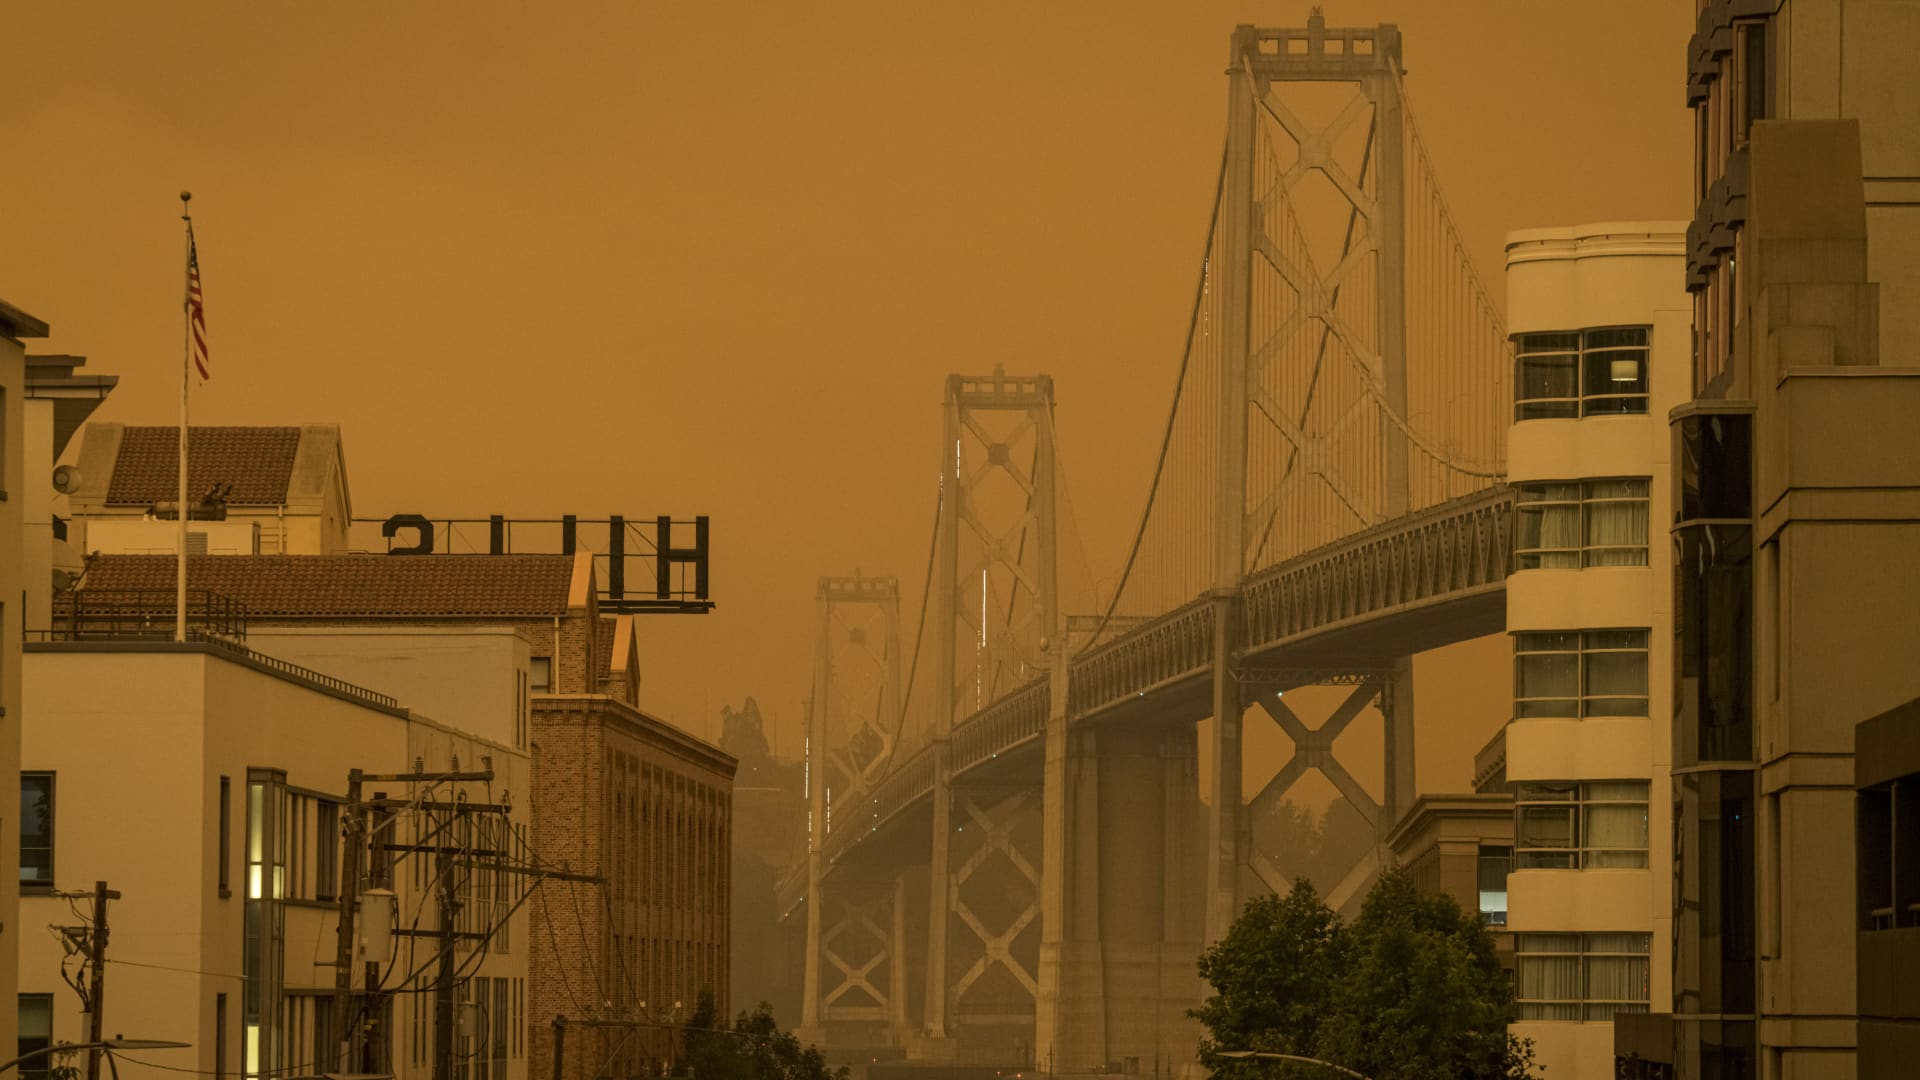 California and other Western states lead in unhealthy levels of air pollution, report shows